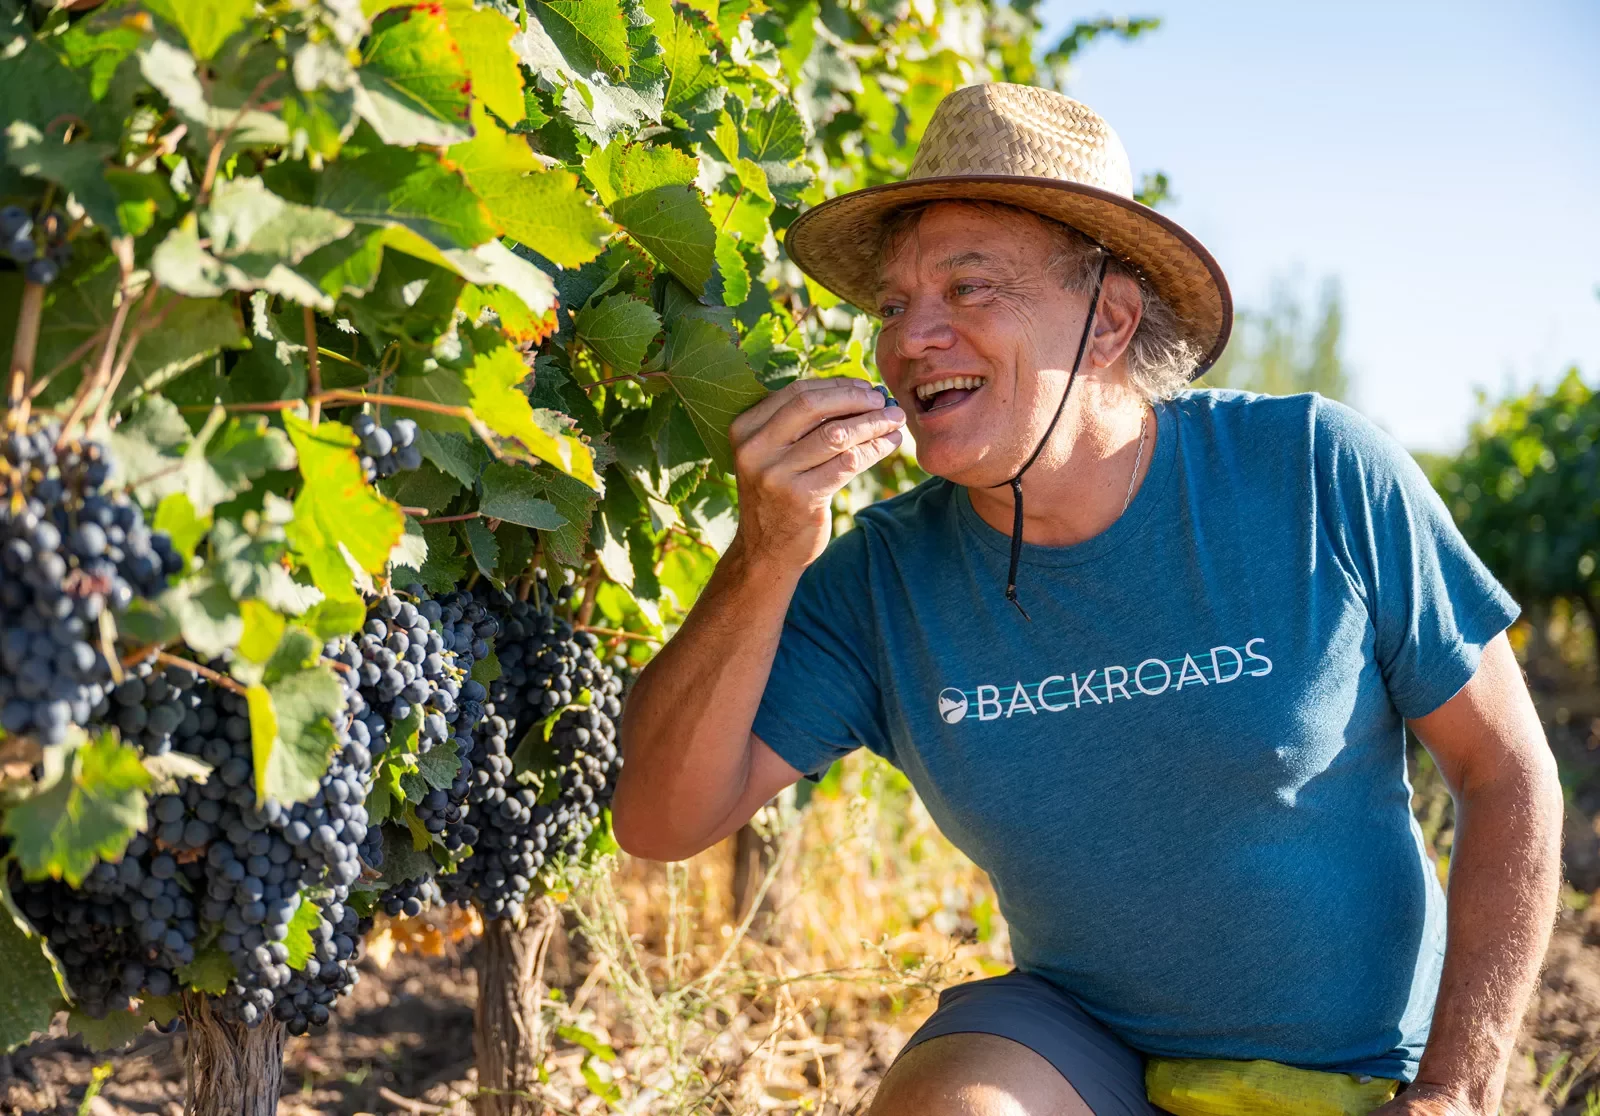 backroads guest tasting grapes from the vine